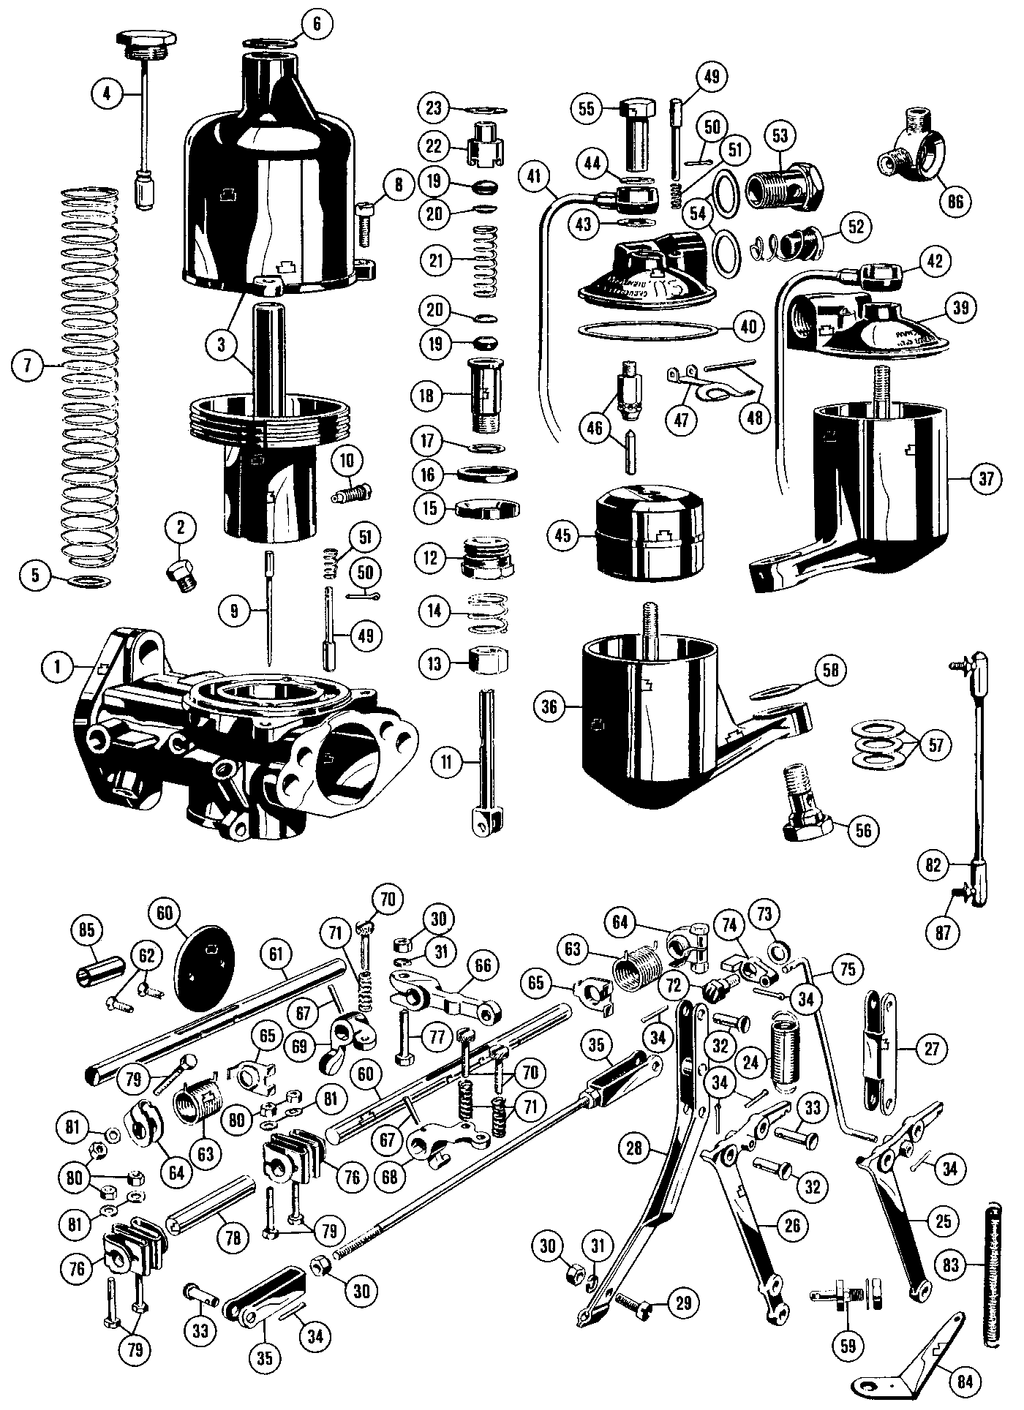 MGTD-TF 1949-1955 - Throttle bodies | Webshop Anglo Parts - Carburettors H4 - 1